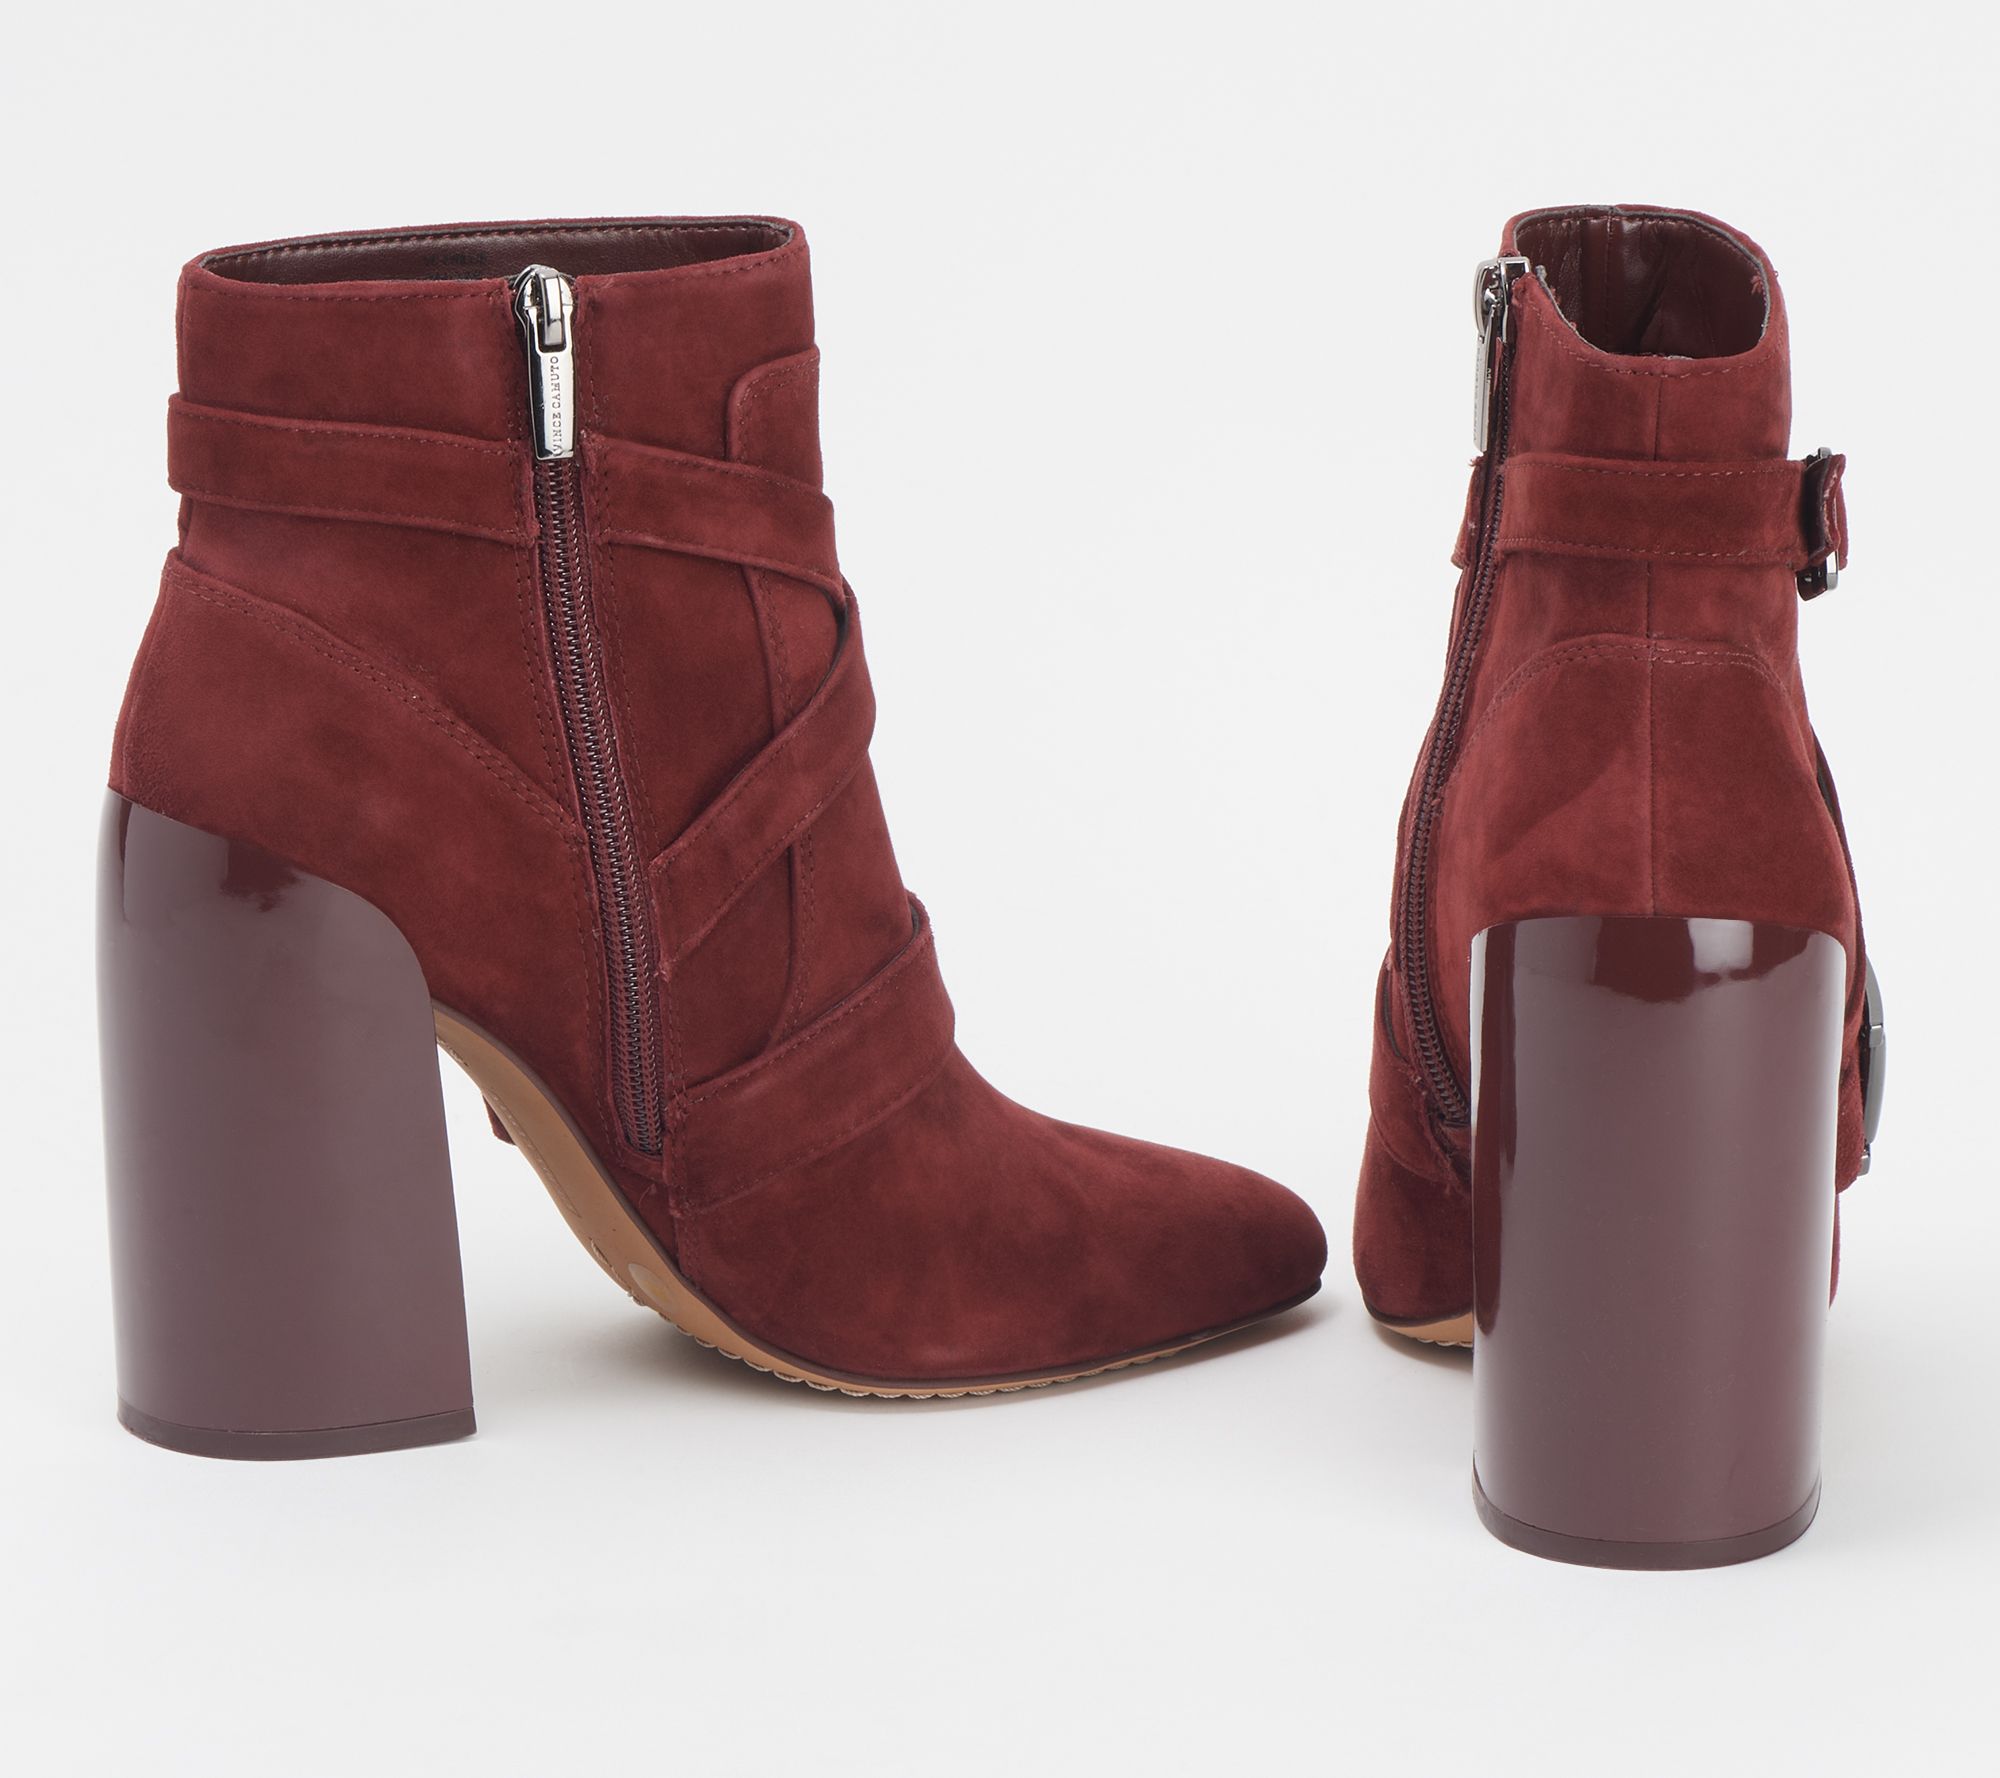 Vince Camuto Leather or Suede Moto Ankle Boots - Erillie 